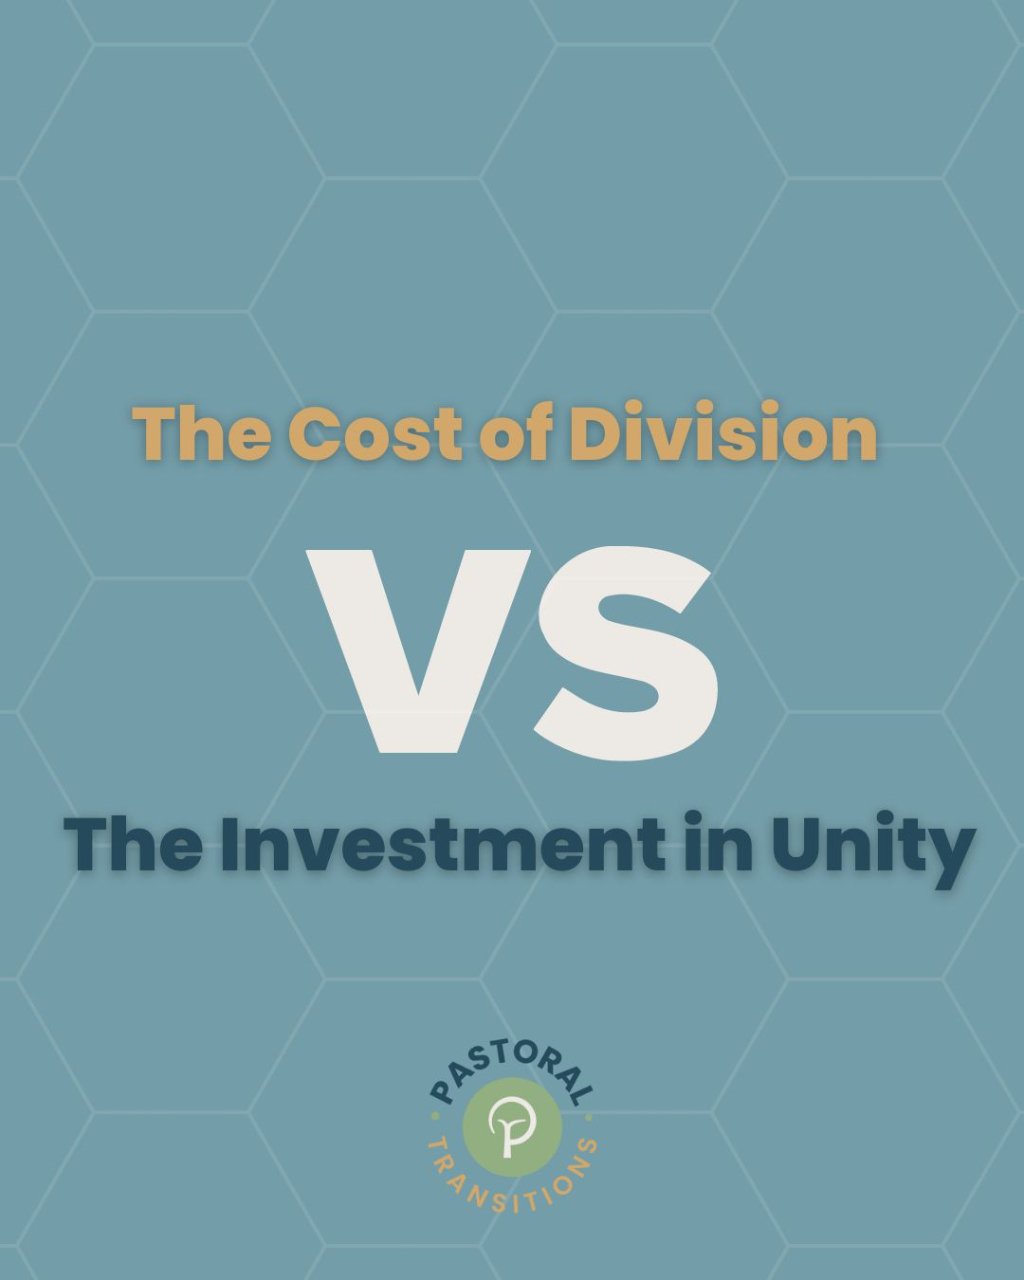 Every poorly handled pastoral transition costs more than it saves.

It's not just about budgets; it's about trust, community, and legacy. Investing in a graceful transition is investing in the church's future.

Let's choose unity over division, every